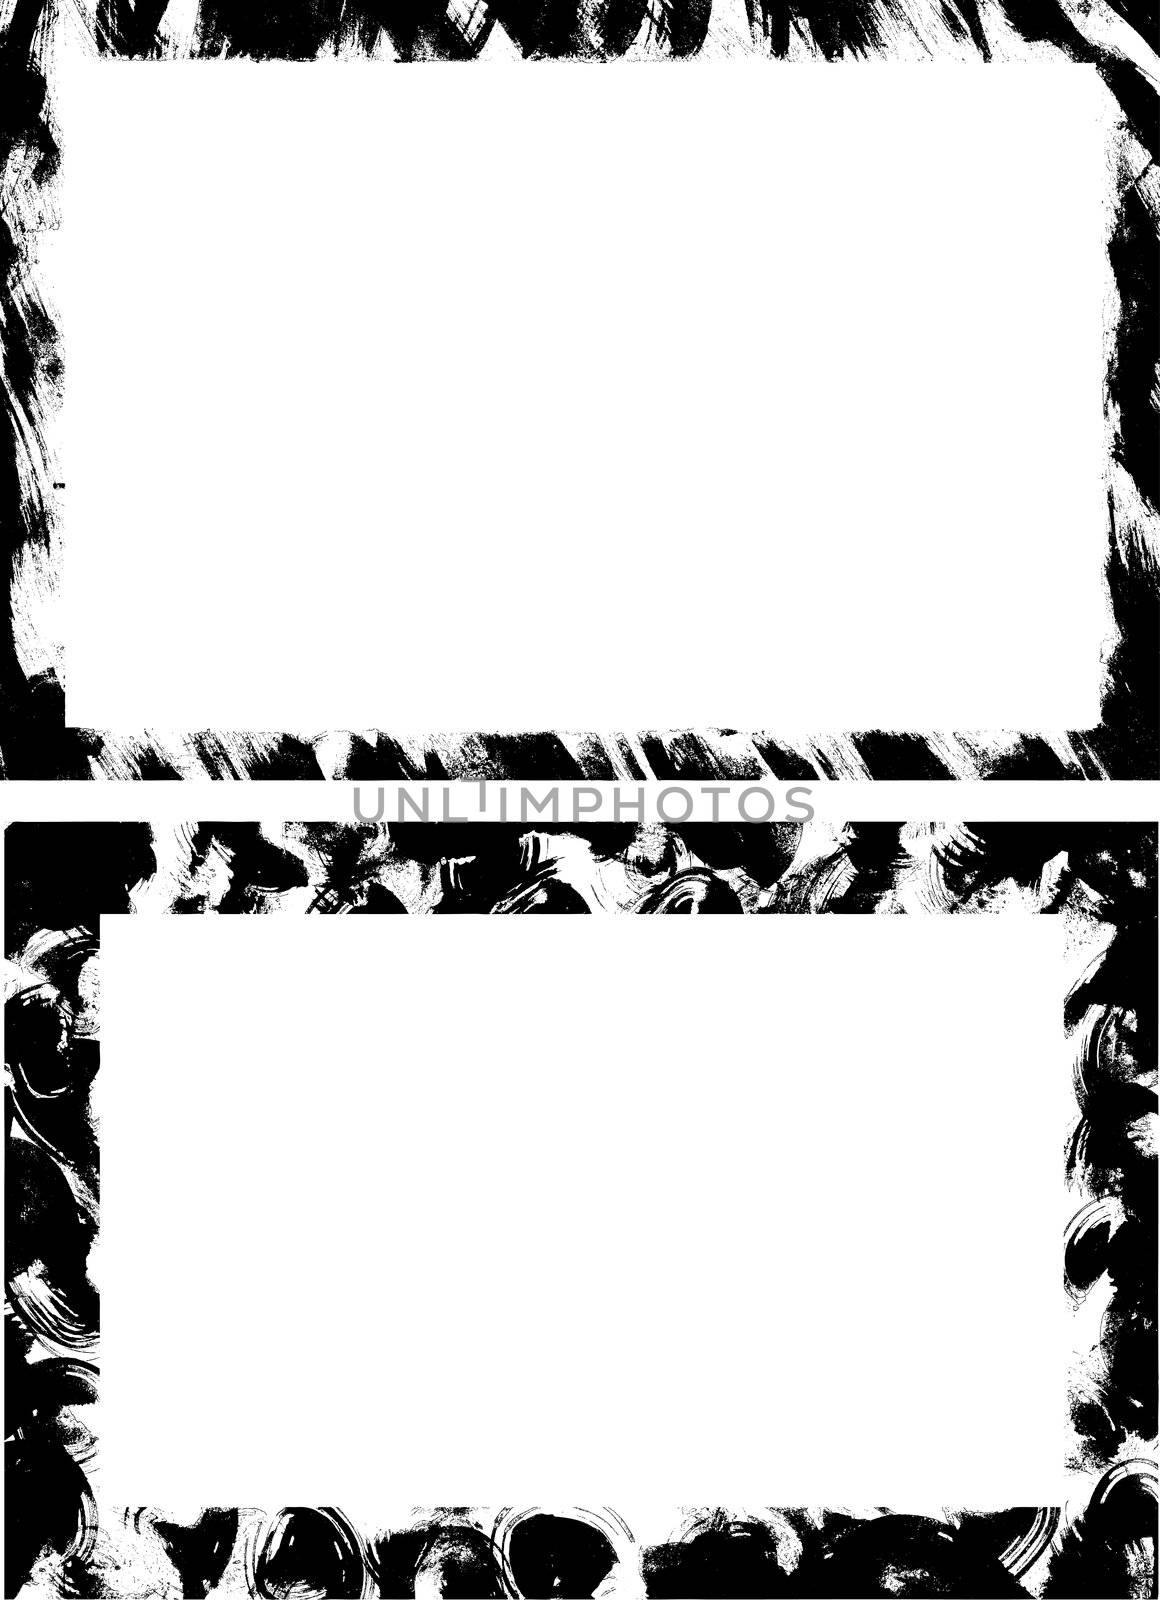 Pair of rectangular vector grunge backgrounds from original ink drawings